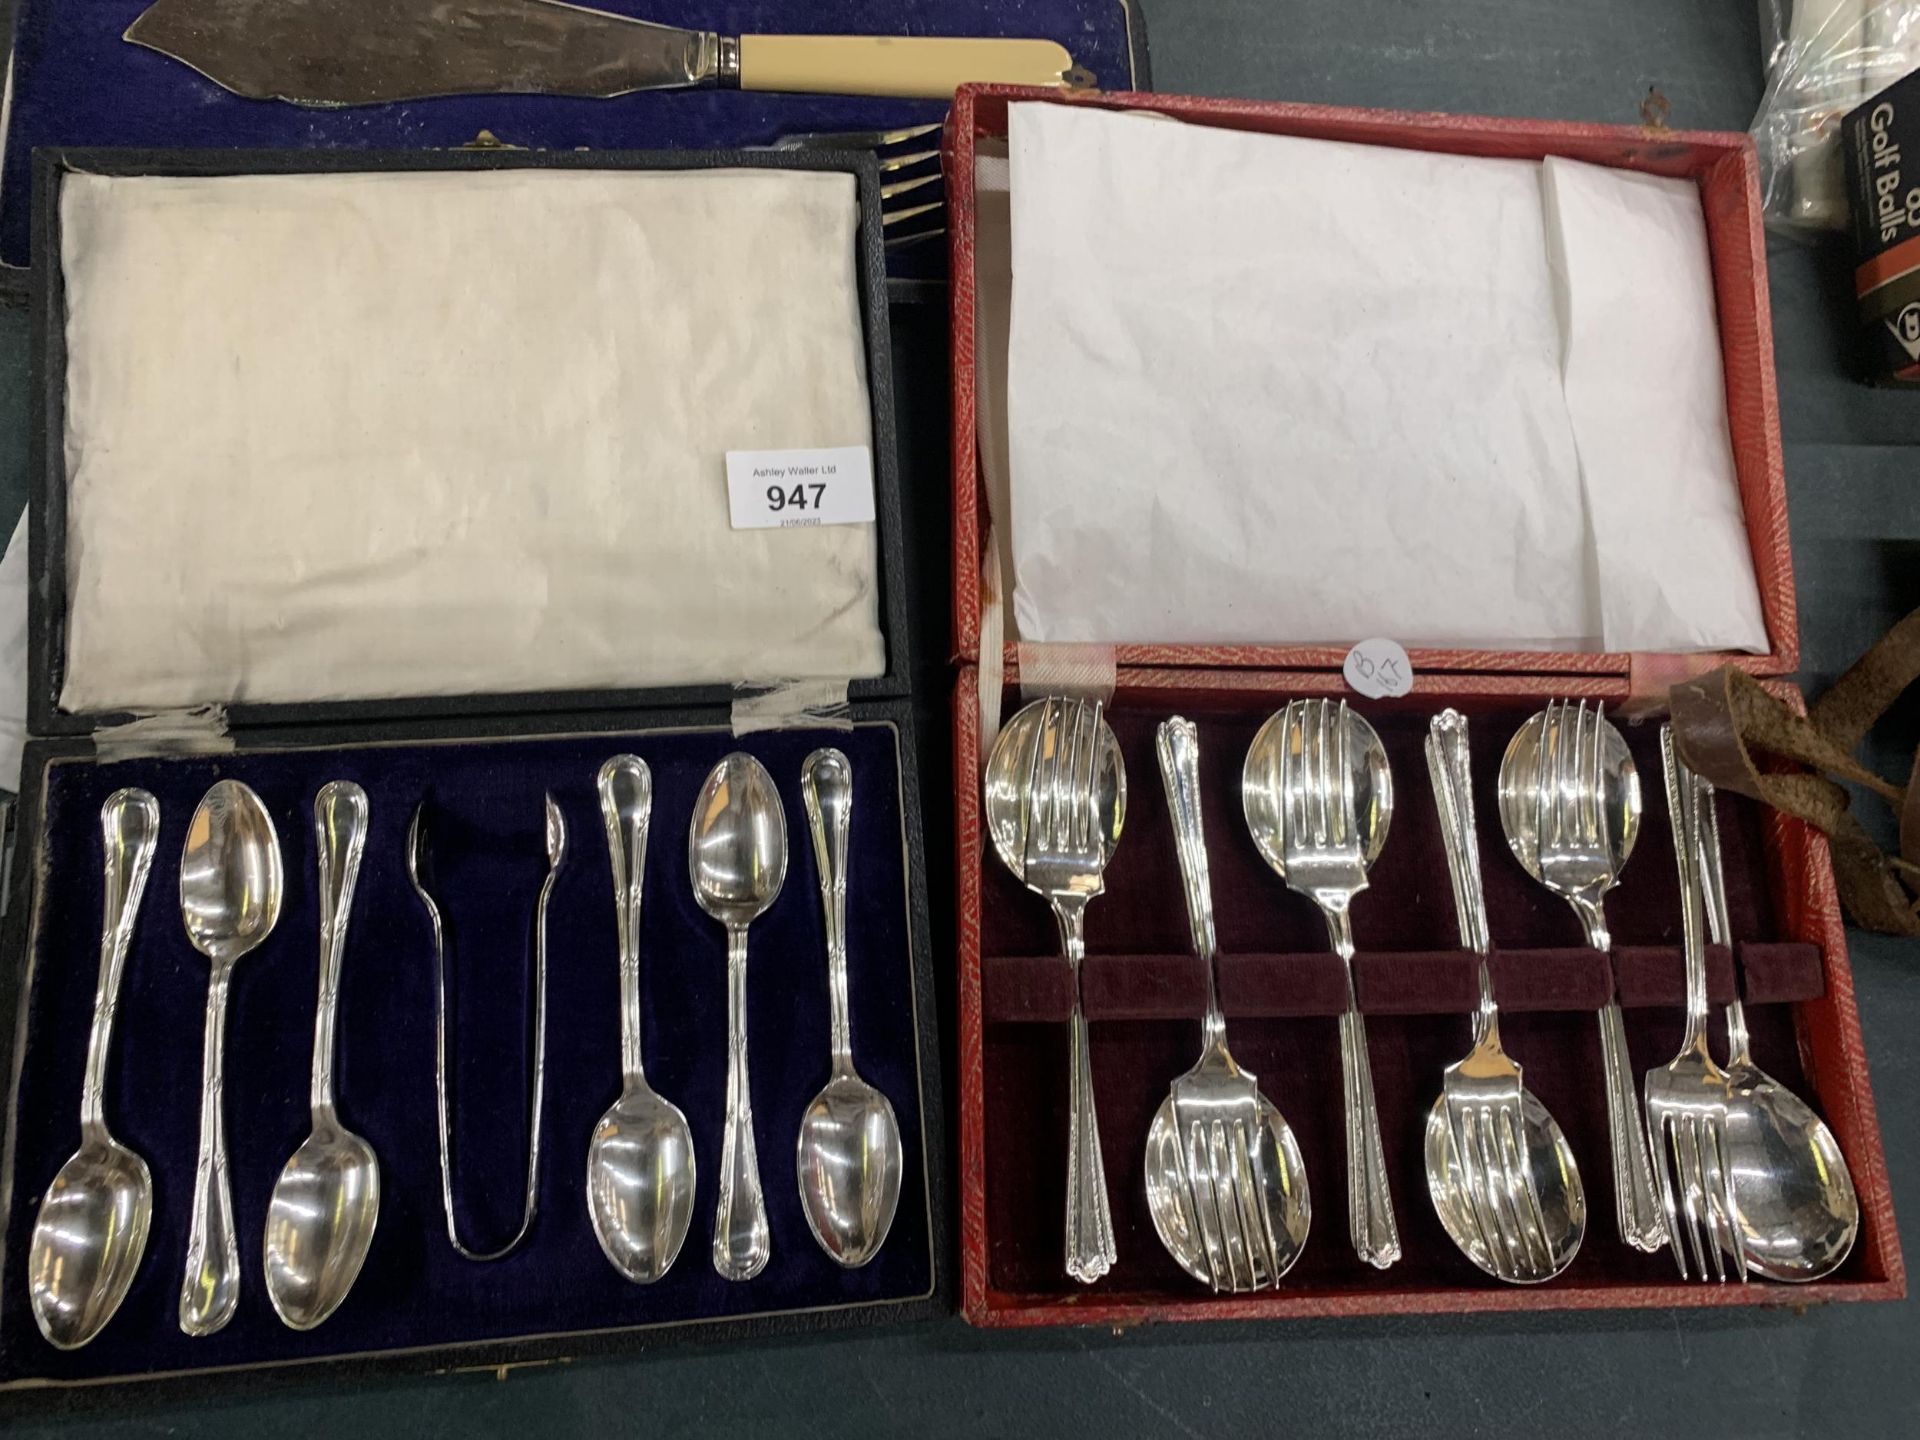 FOUR VINTAGE BOXES OF FLATWARE TO INCLUDE A CARVING SET, FISH SERVING SET, TEASPOONS WITH SUGAR - Image 3 of 3